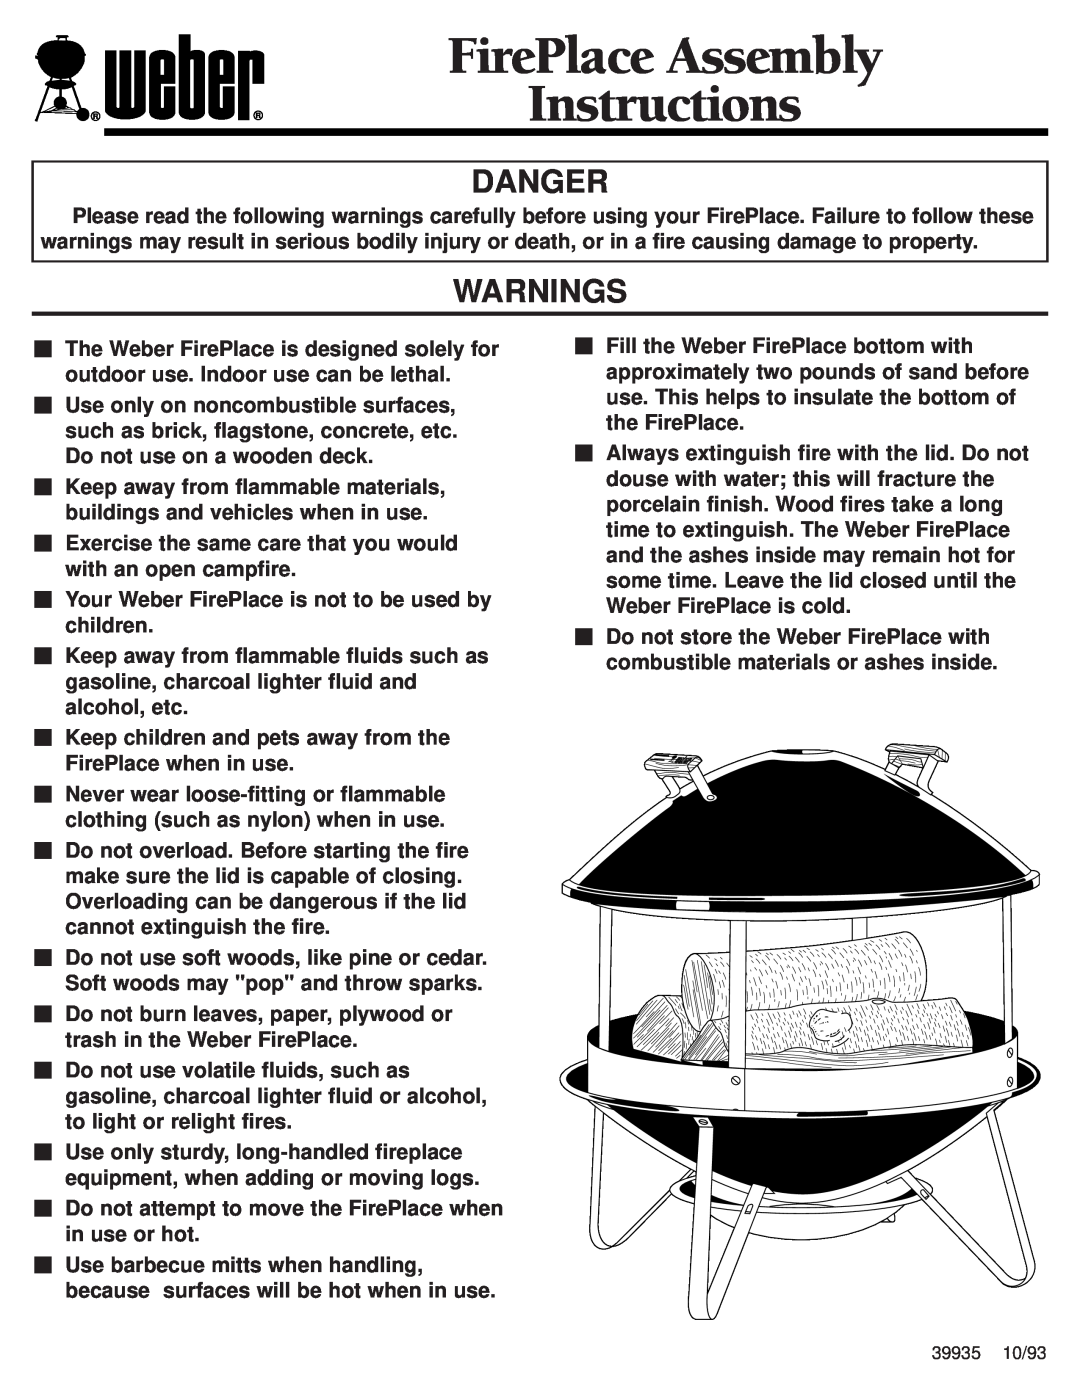 Weber Indoor Fireplace manual Danger, Warnings, Instructions, FirePlace Assembly 